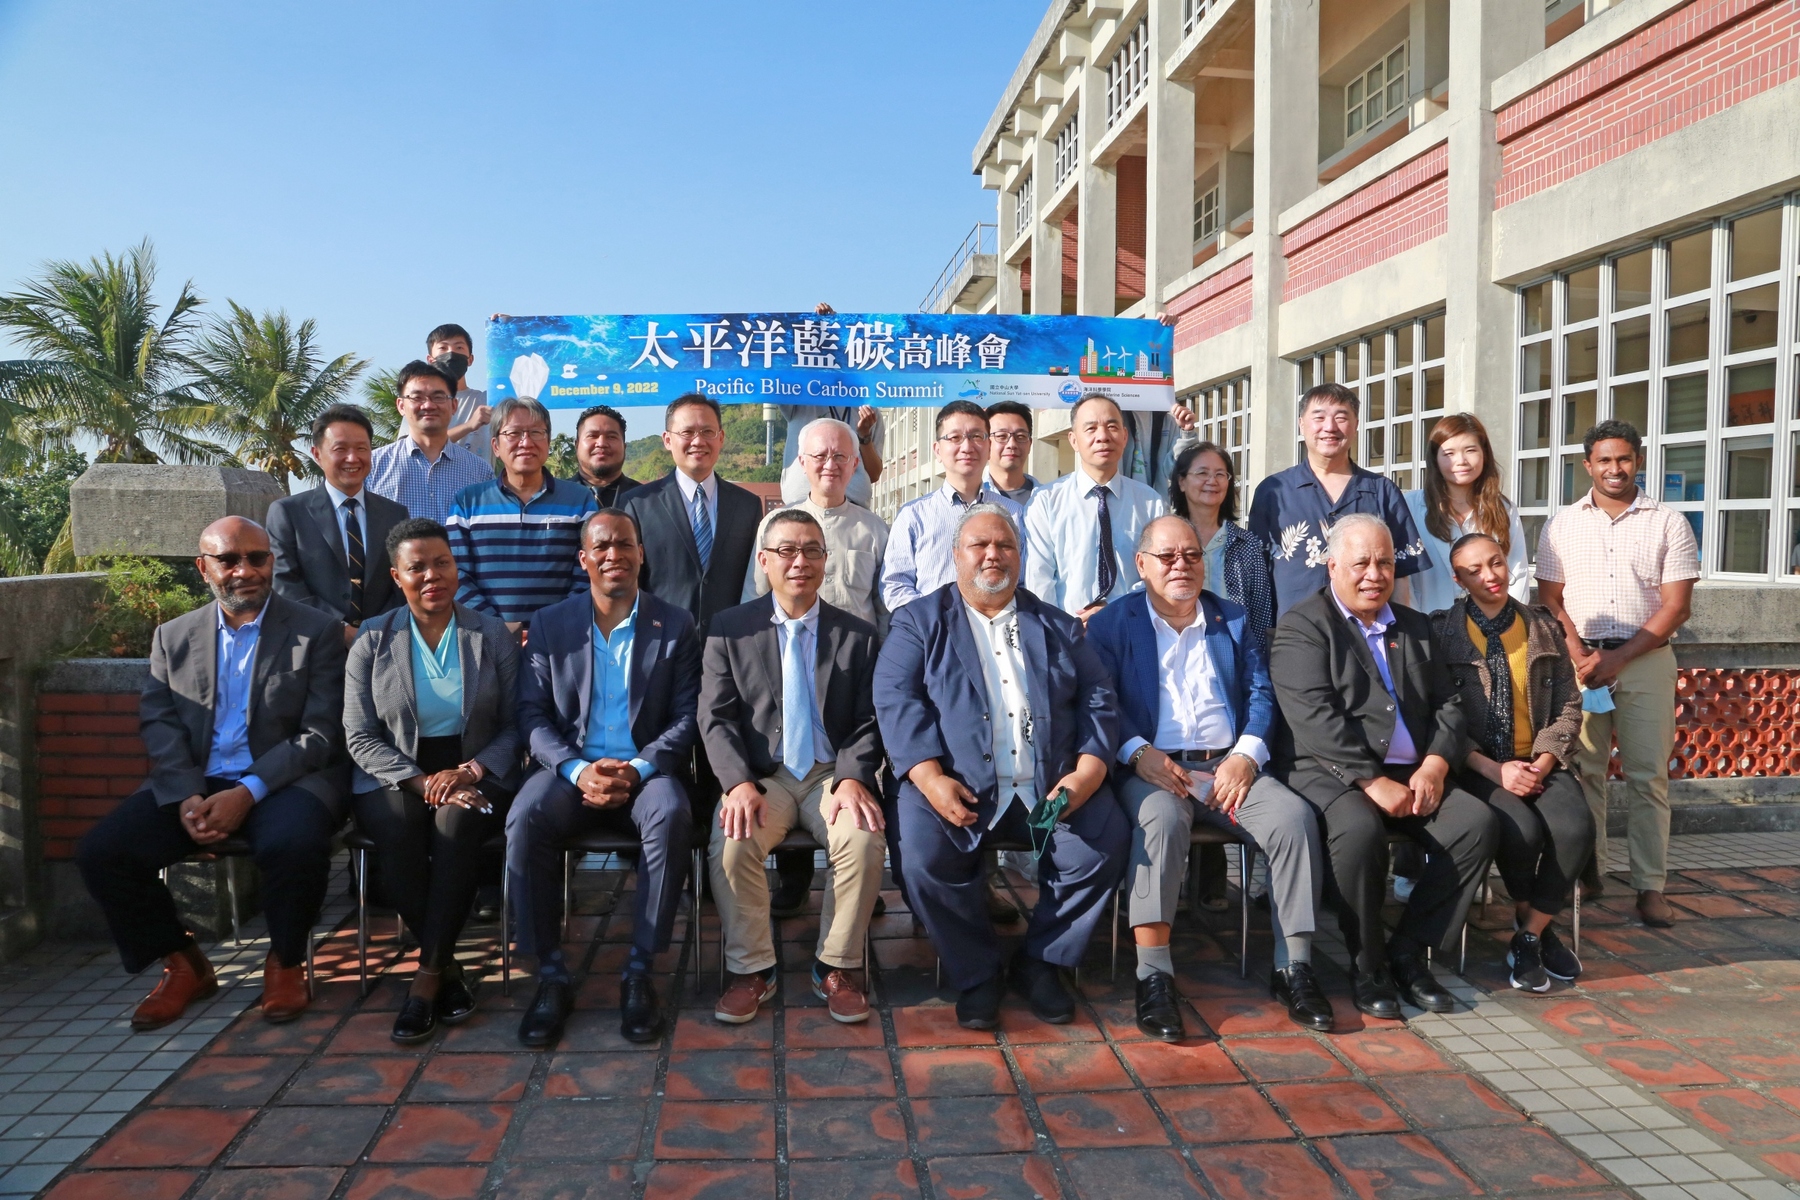 A group photo of the participants of the Pacific Blue Carbon Summit.